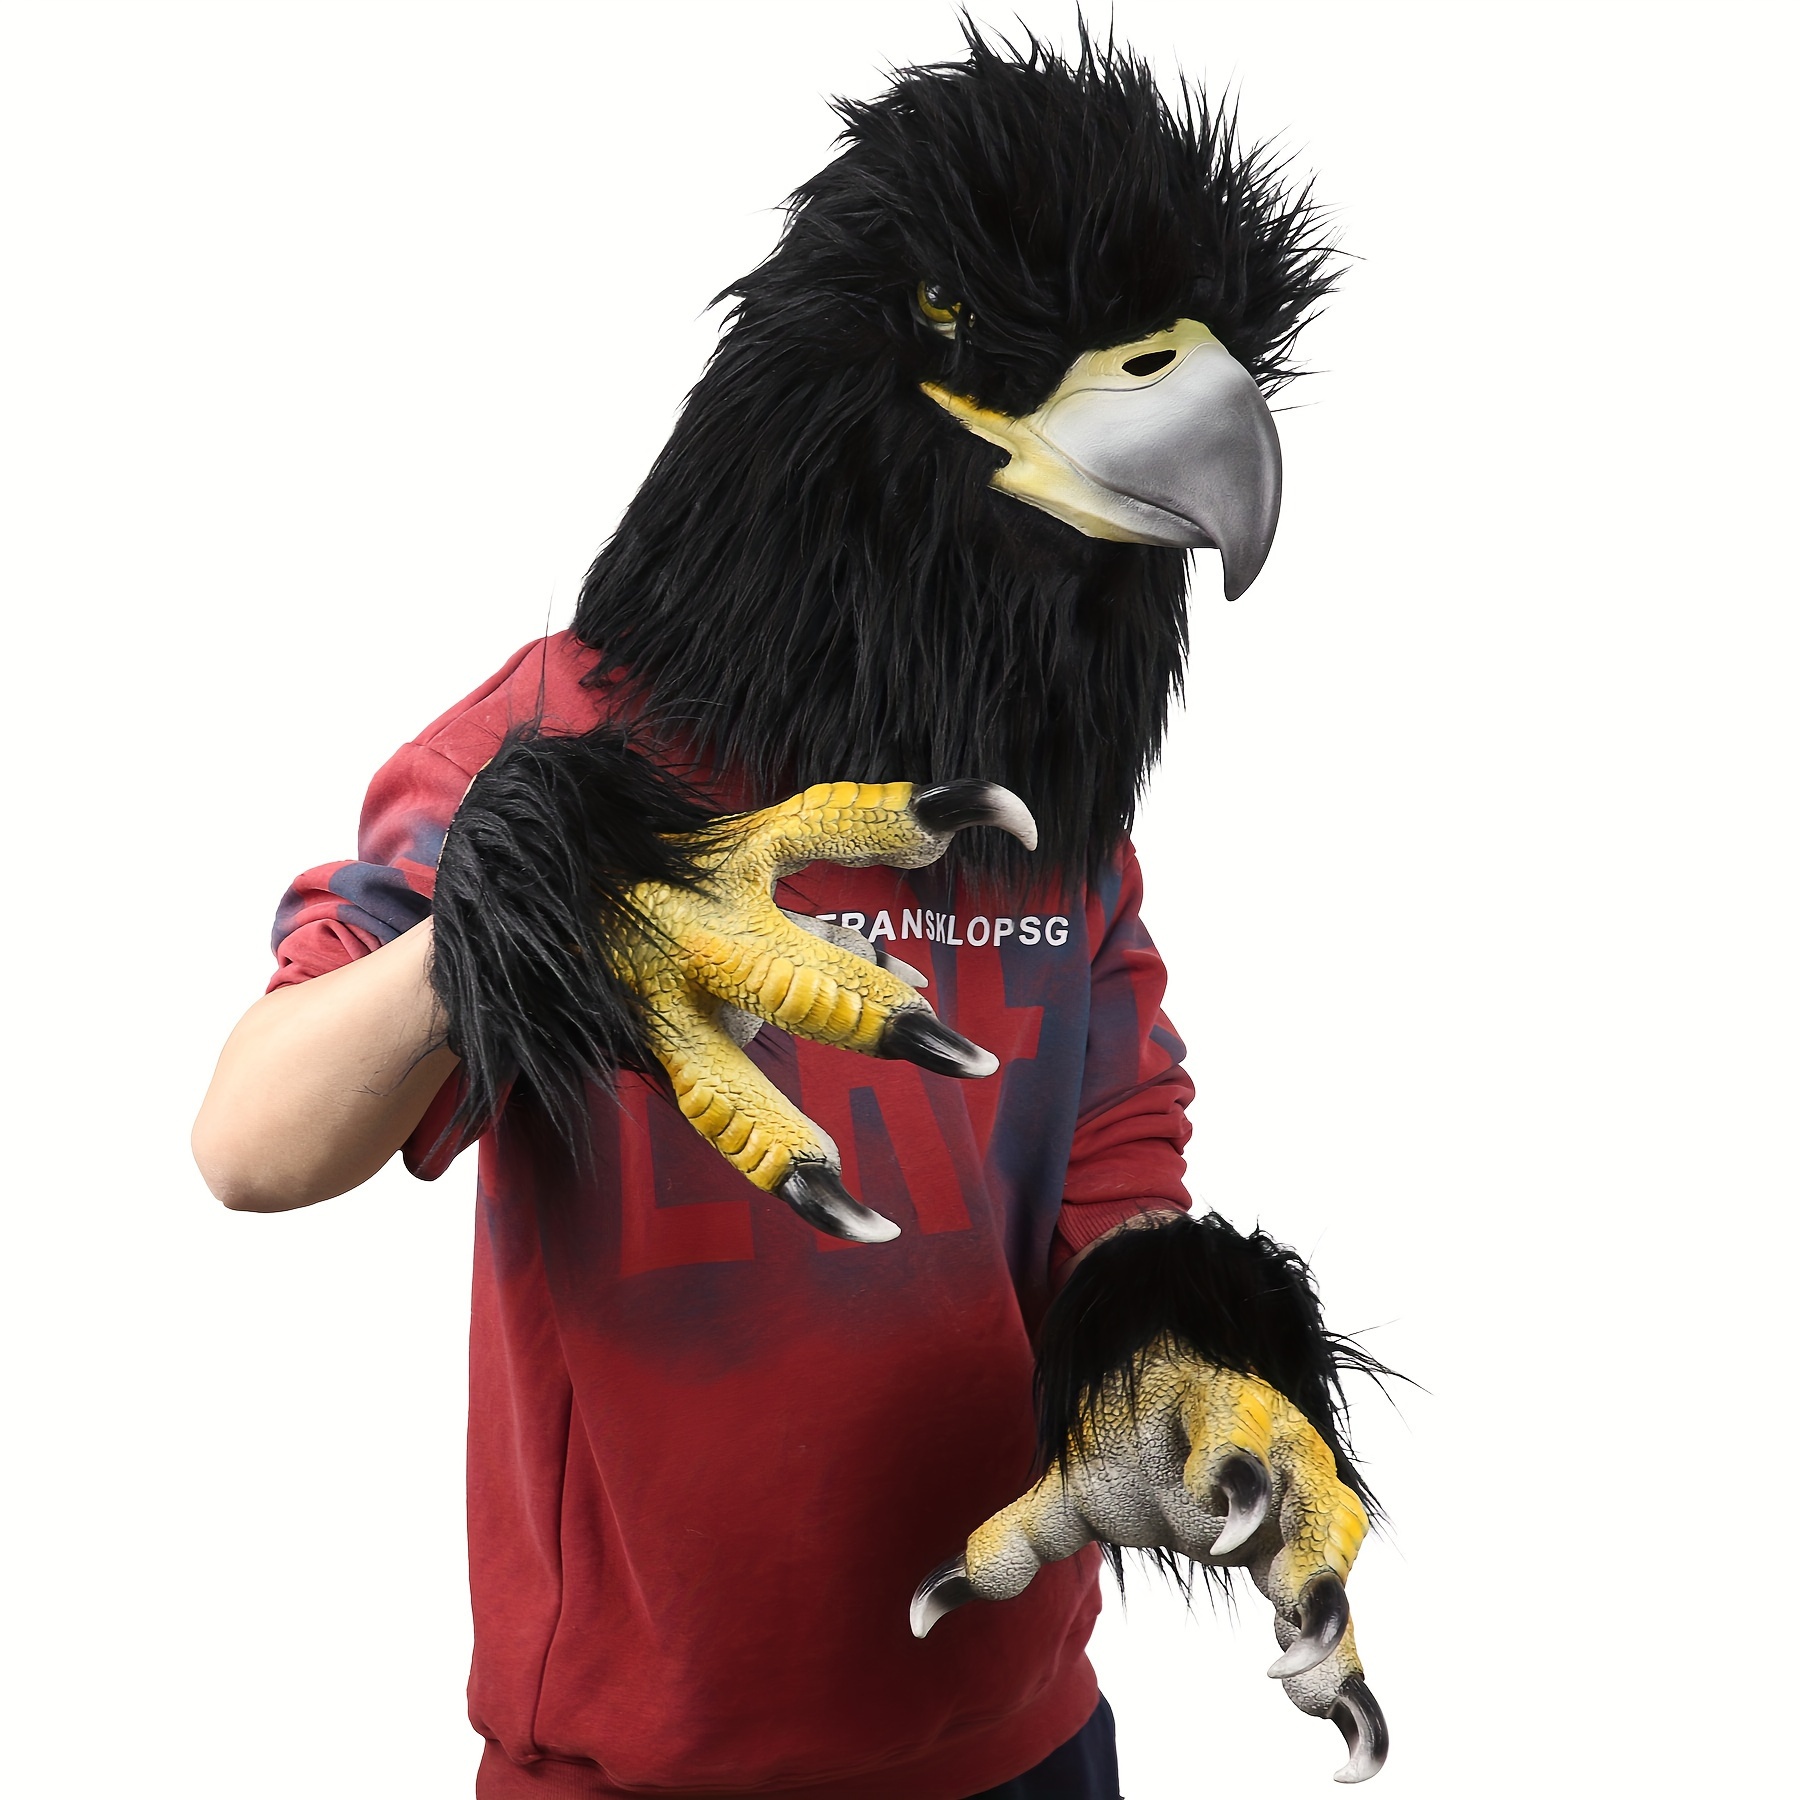  Mascot Inflatable Eagle Costume, Inflatable Eagle Costume for  Adult Air Blow up Bald Eagle Halloween Costume : Clothing, Shoes & Jewelry